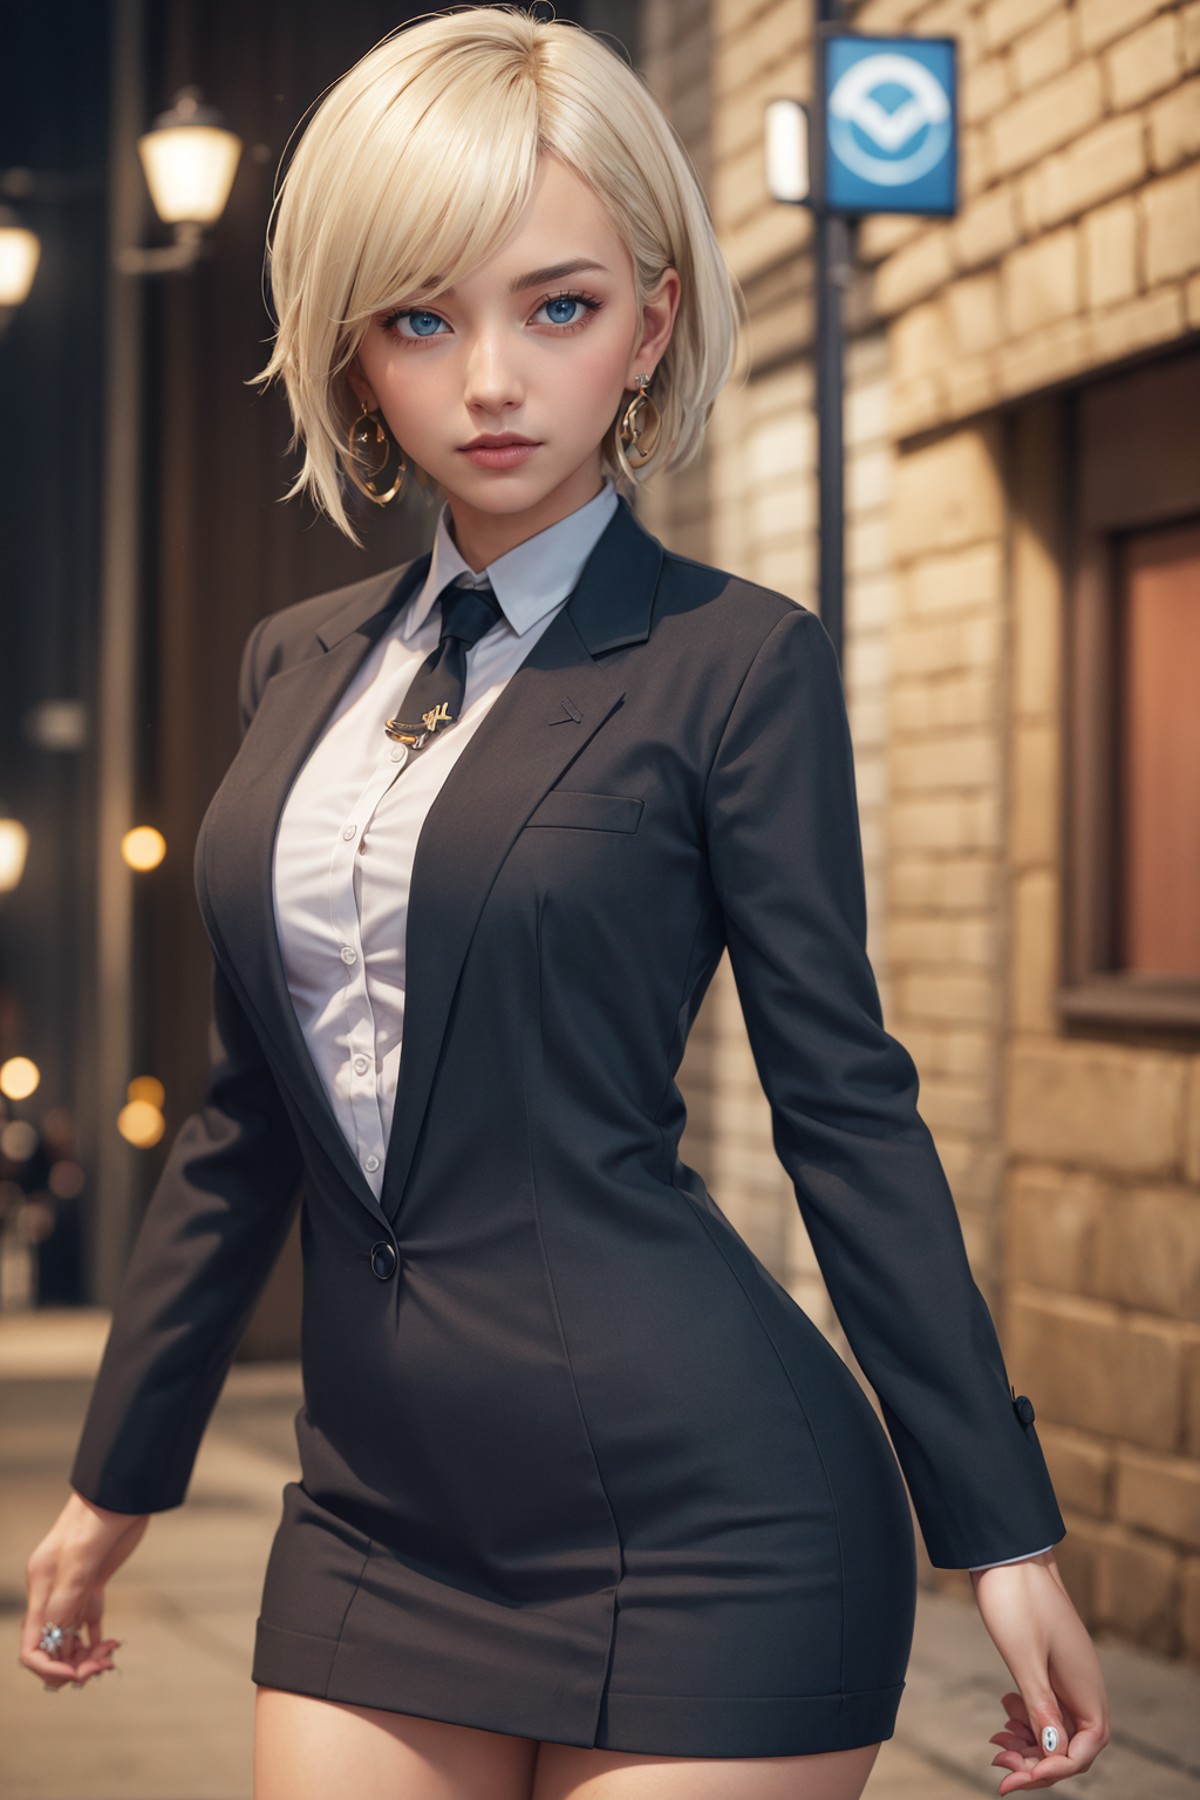 ((masterpiece)), (best quality), official art, extremely detailed CG, unity 8k wallpaper, ultra detailed,
Naje Berca, blon...